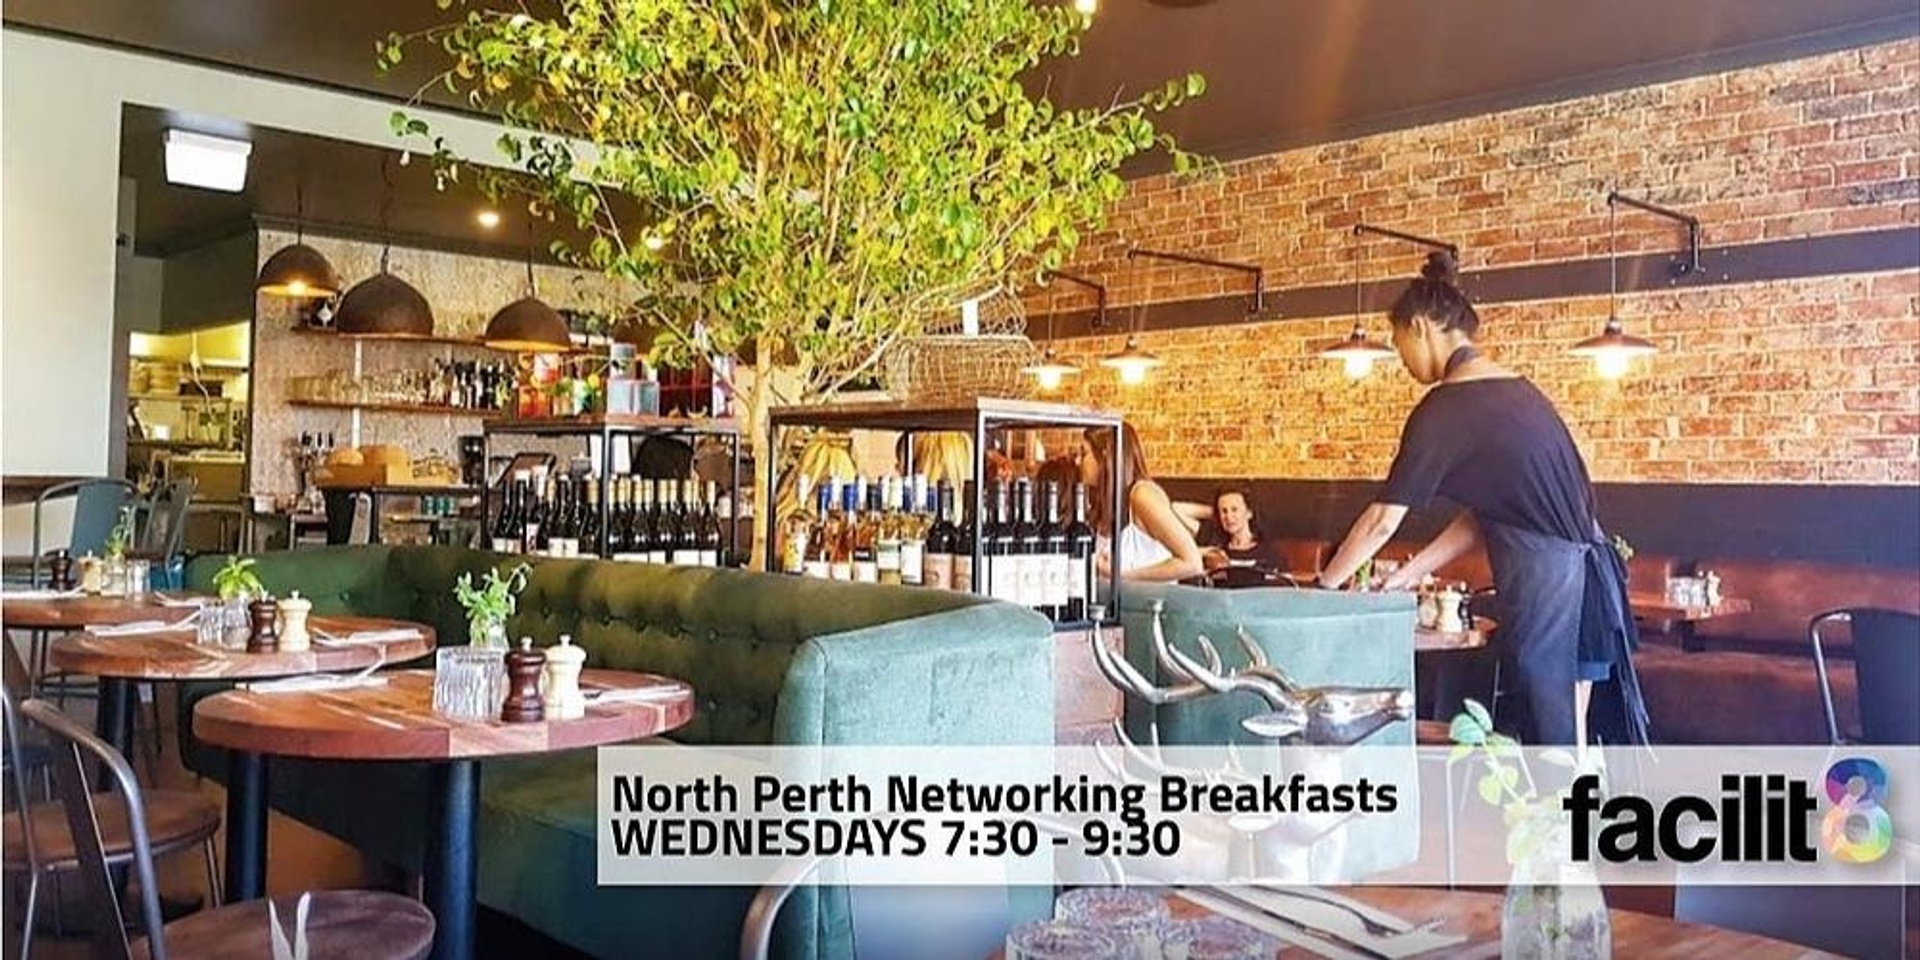 Facilit8 Networking Breakfasts 2022 - North Perth Group